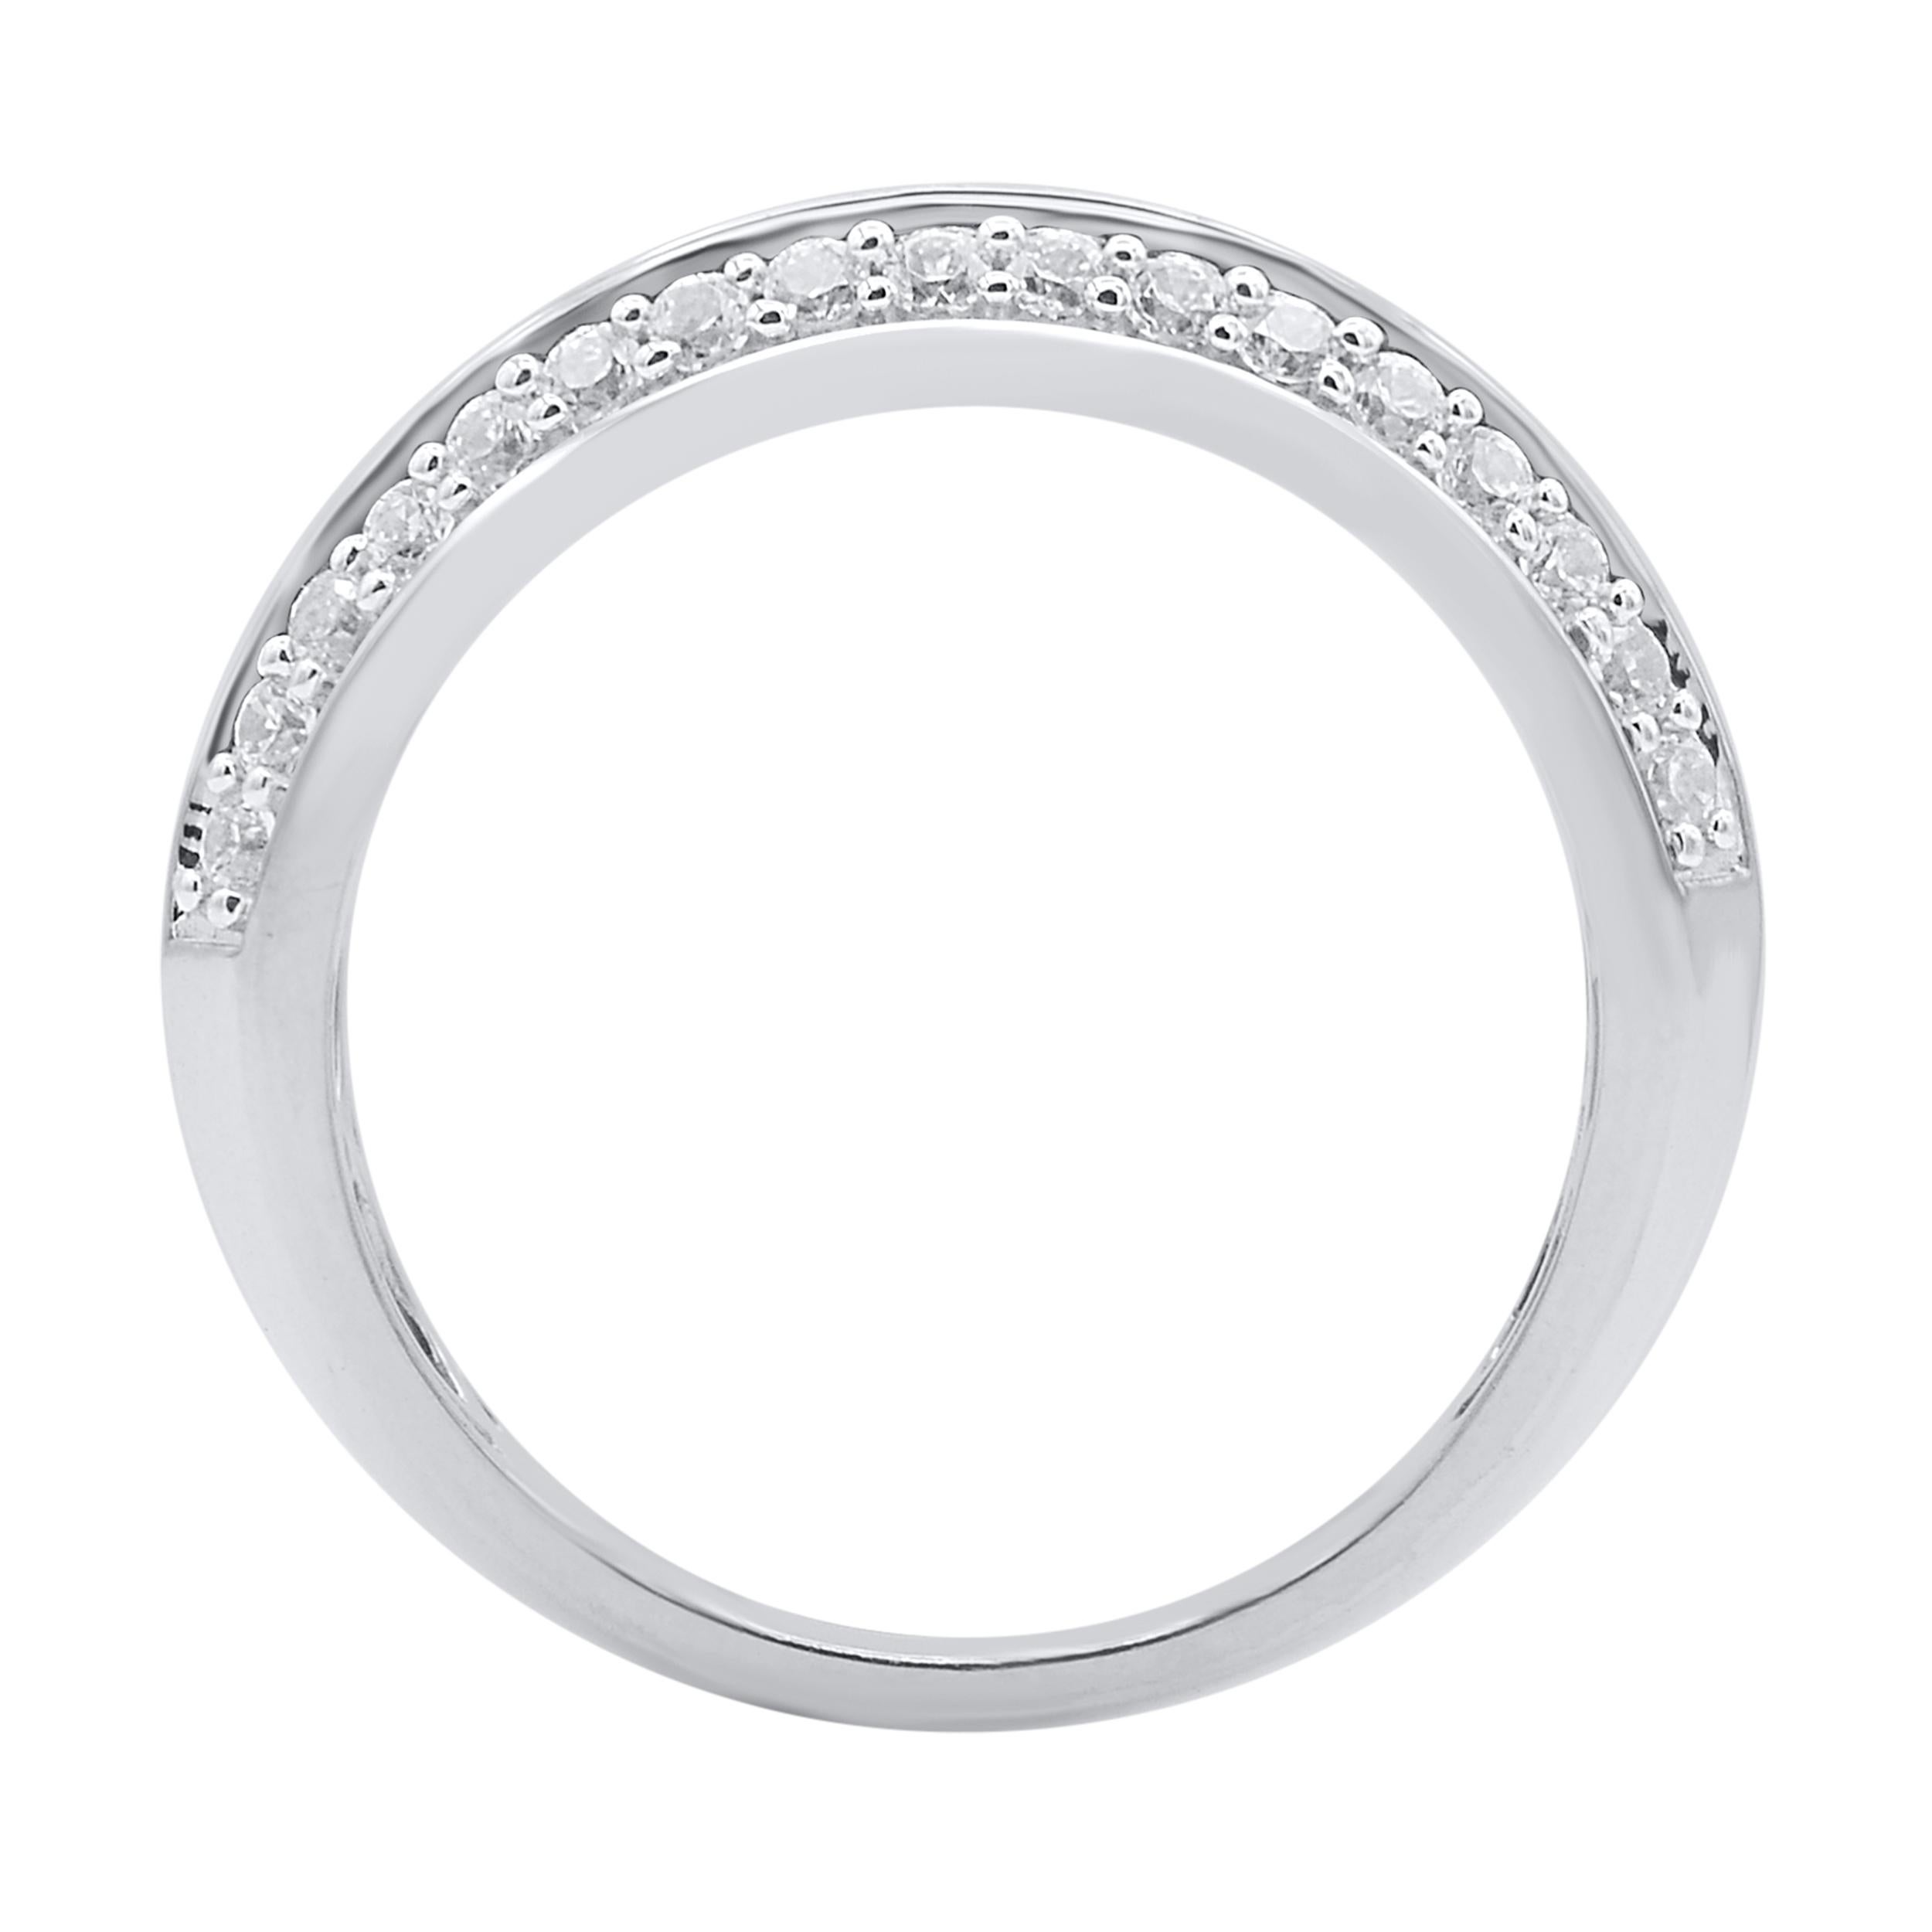 This beautiful engagement band ring features shimmering brilliant cut round diamonds in nic & pave setting. Crafted in 14 karat white gold. The ring is studded with a total of 43 brilliant cut natural round diamonds and the total diamond weight is